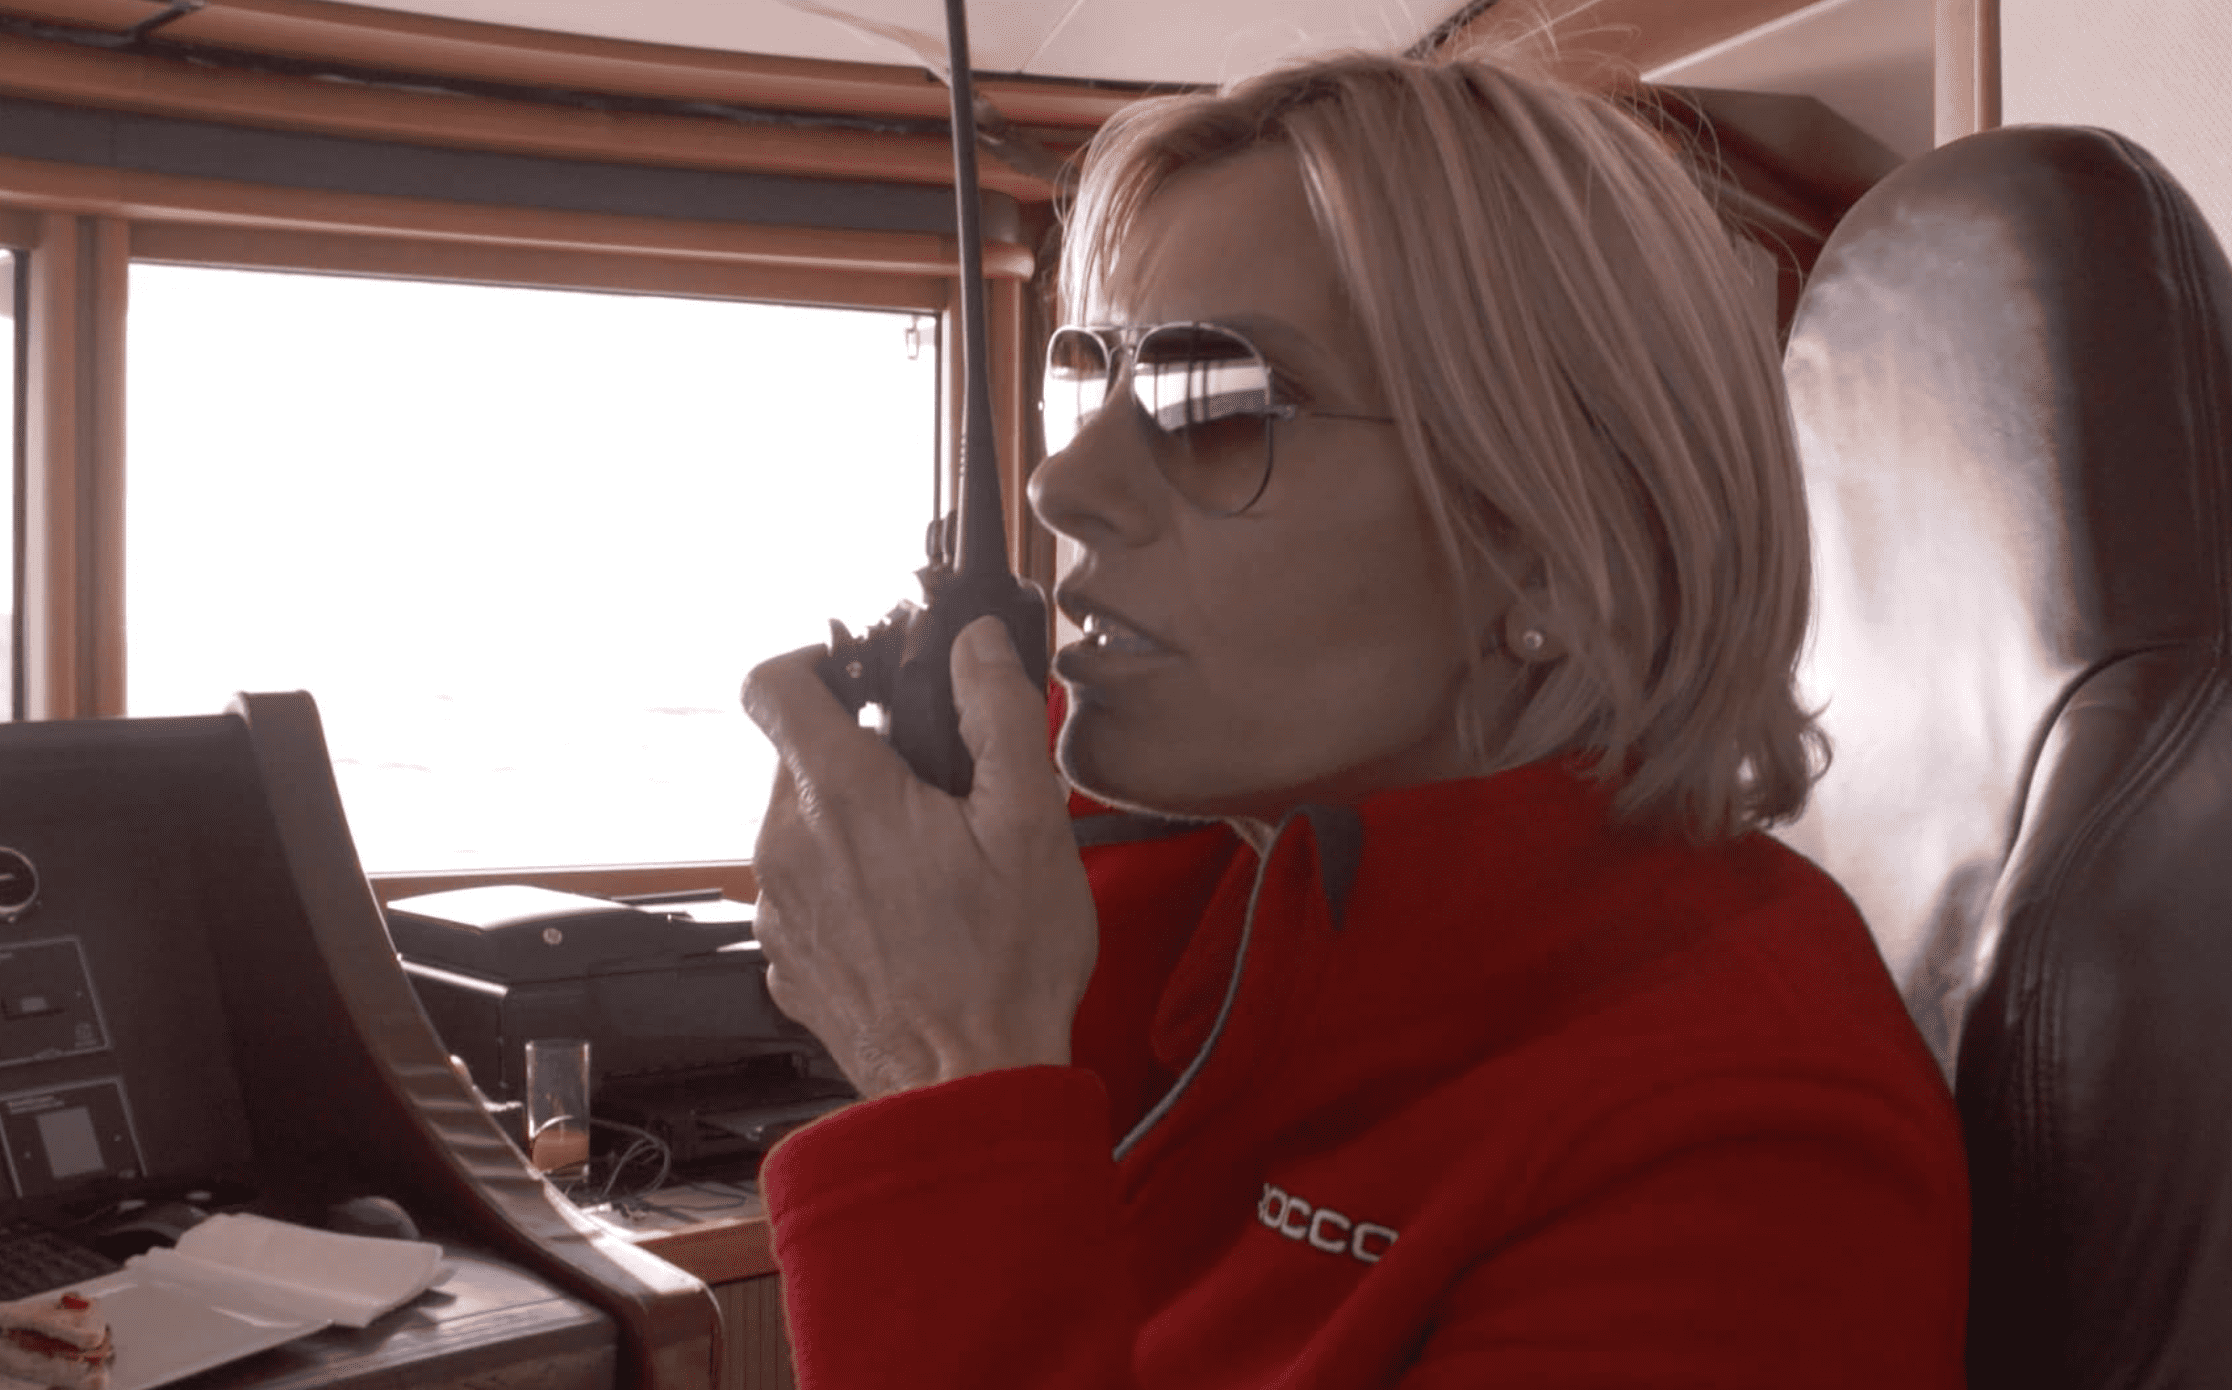 A woman with blond hair, sunglasses, and a red jacket uses a radio from the wheelhouse in this image from 51 Minds Entertainment.